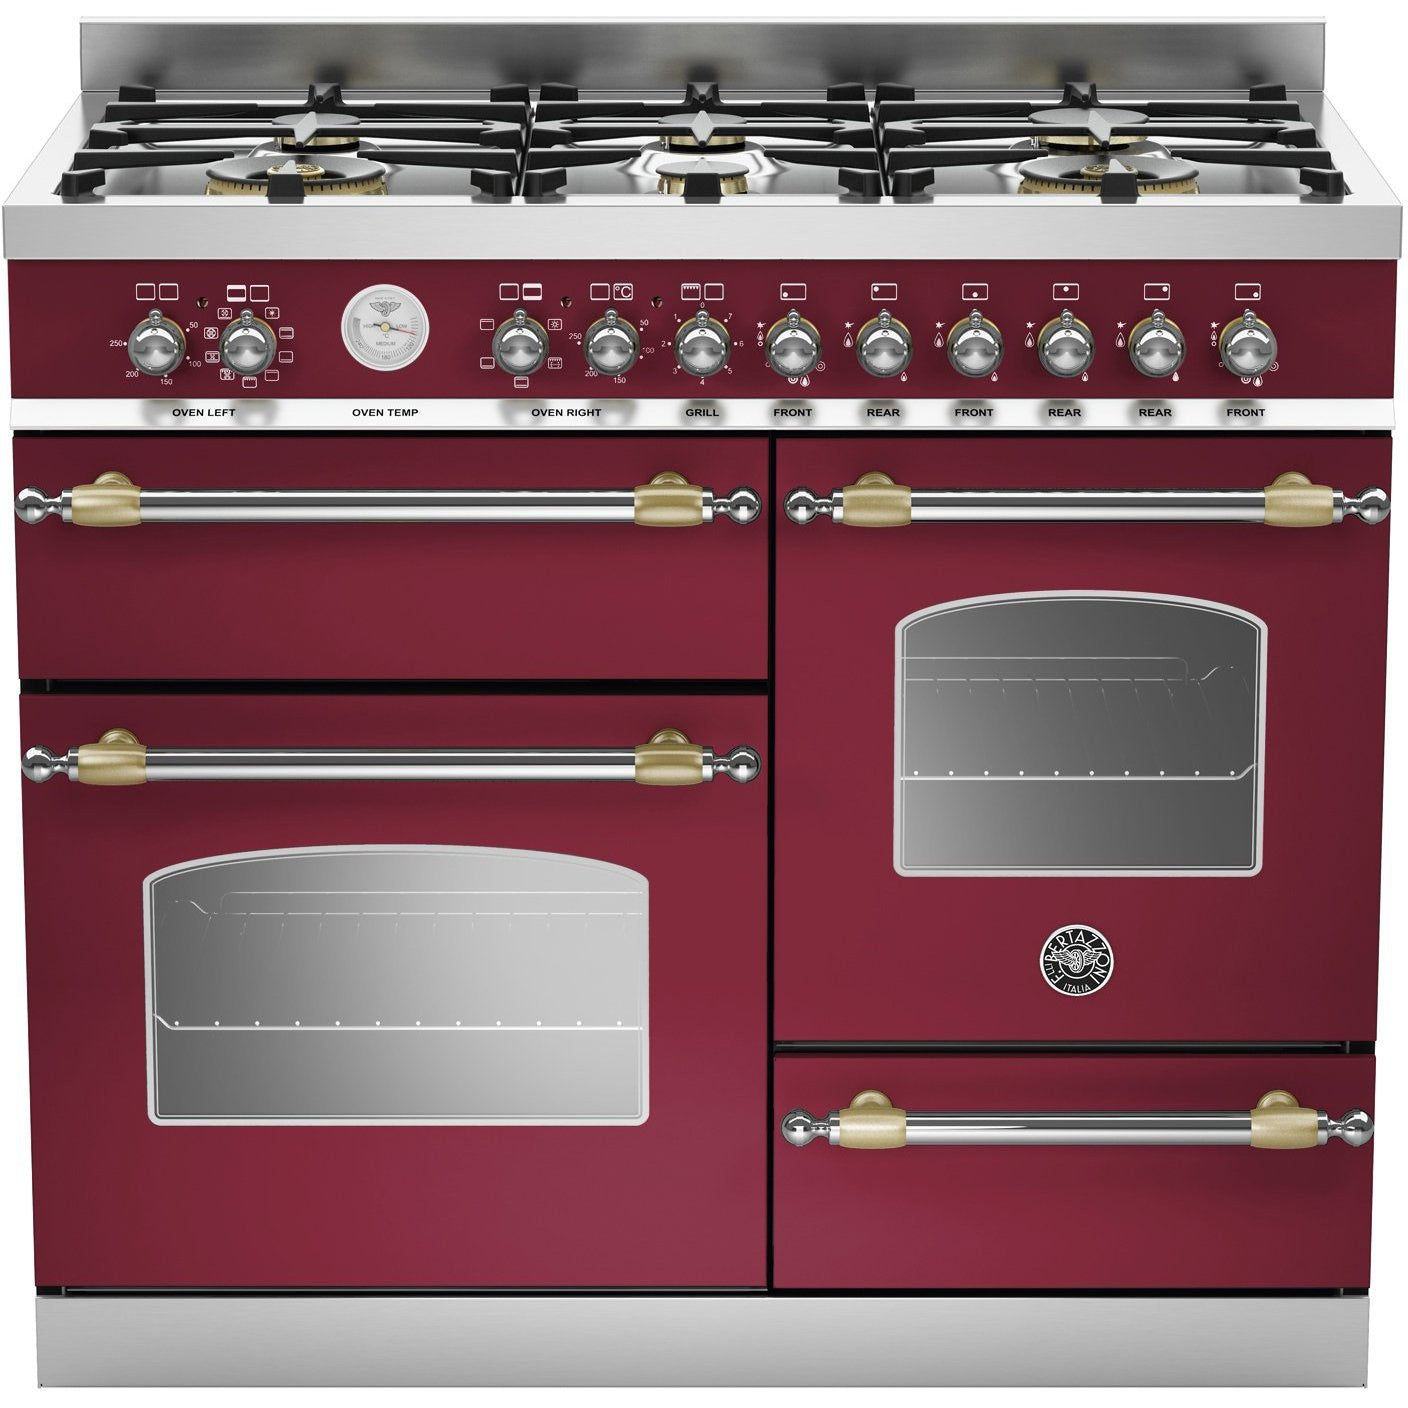 Bertazzoni Her1006mfetvit Heritage 100cm Range Cooker Xg Oven Dual Fuel Matt Burgundy One Only To Clear At This Price